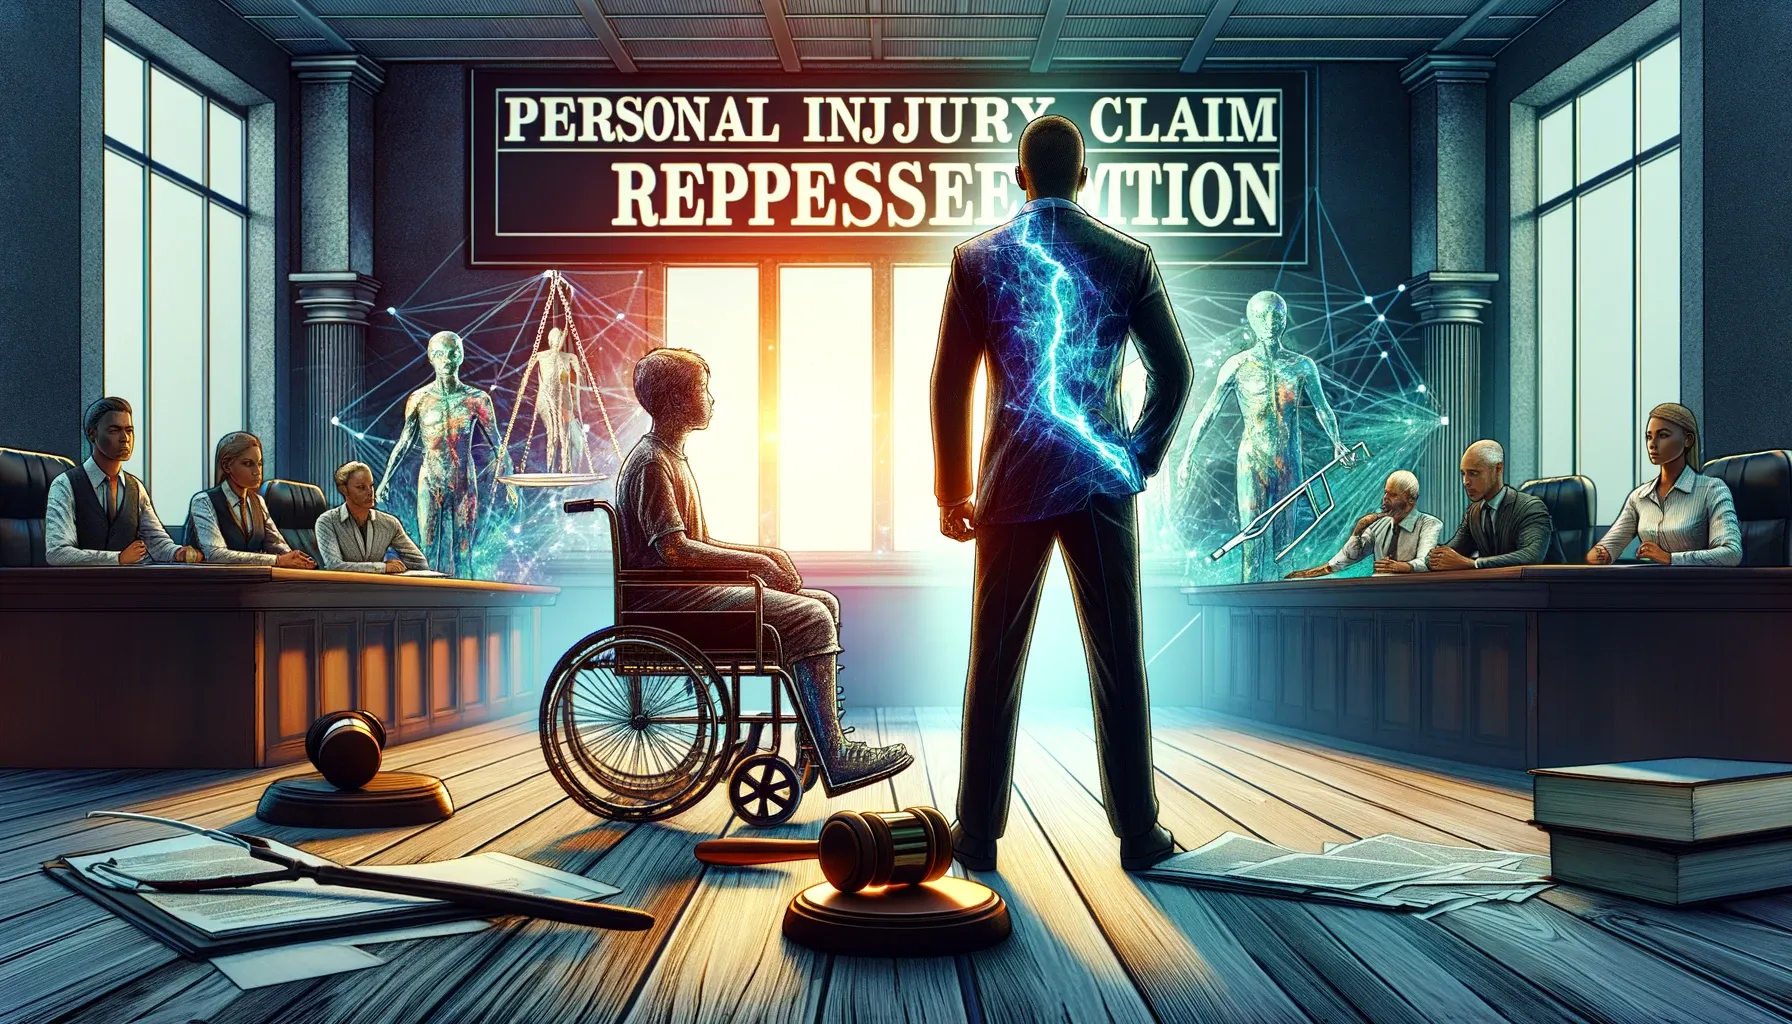 Can I make a personal injury claim on behalf of someone else?